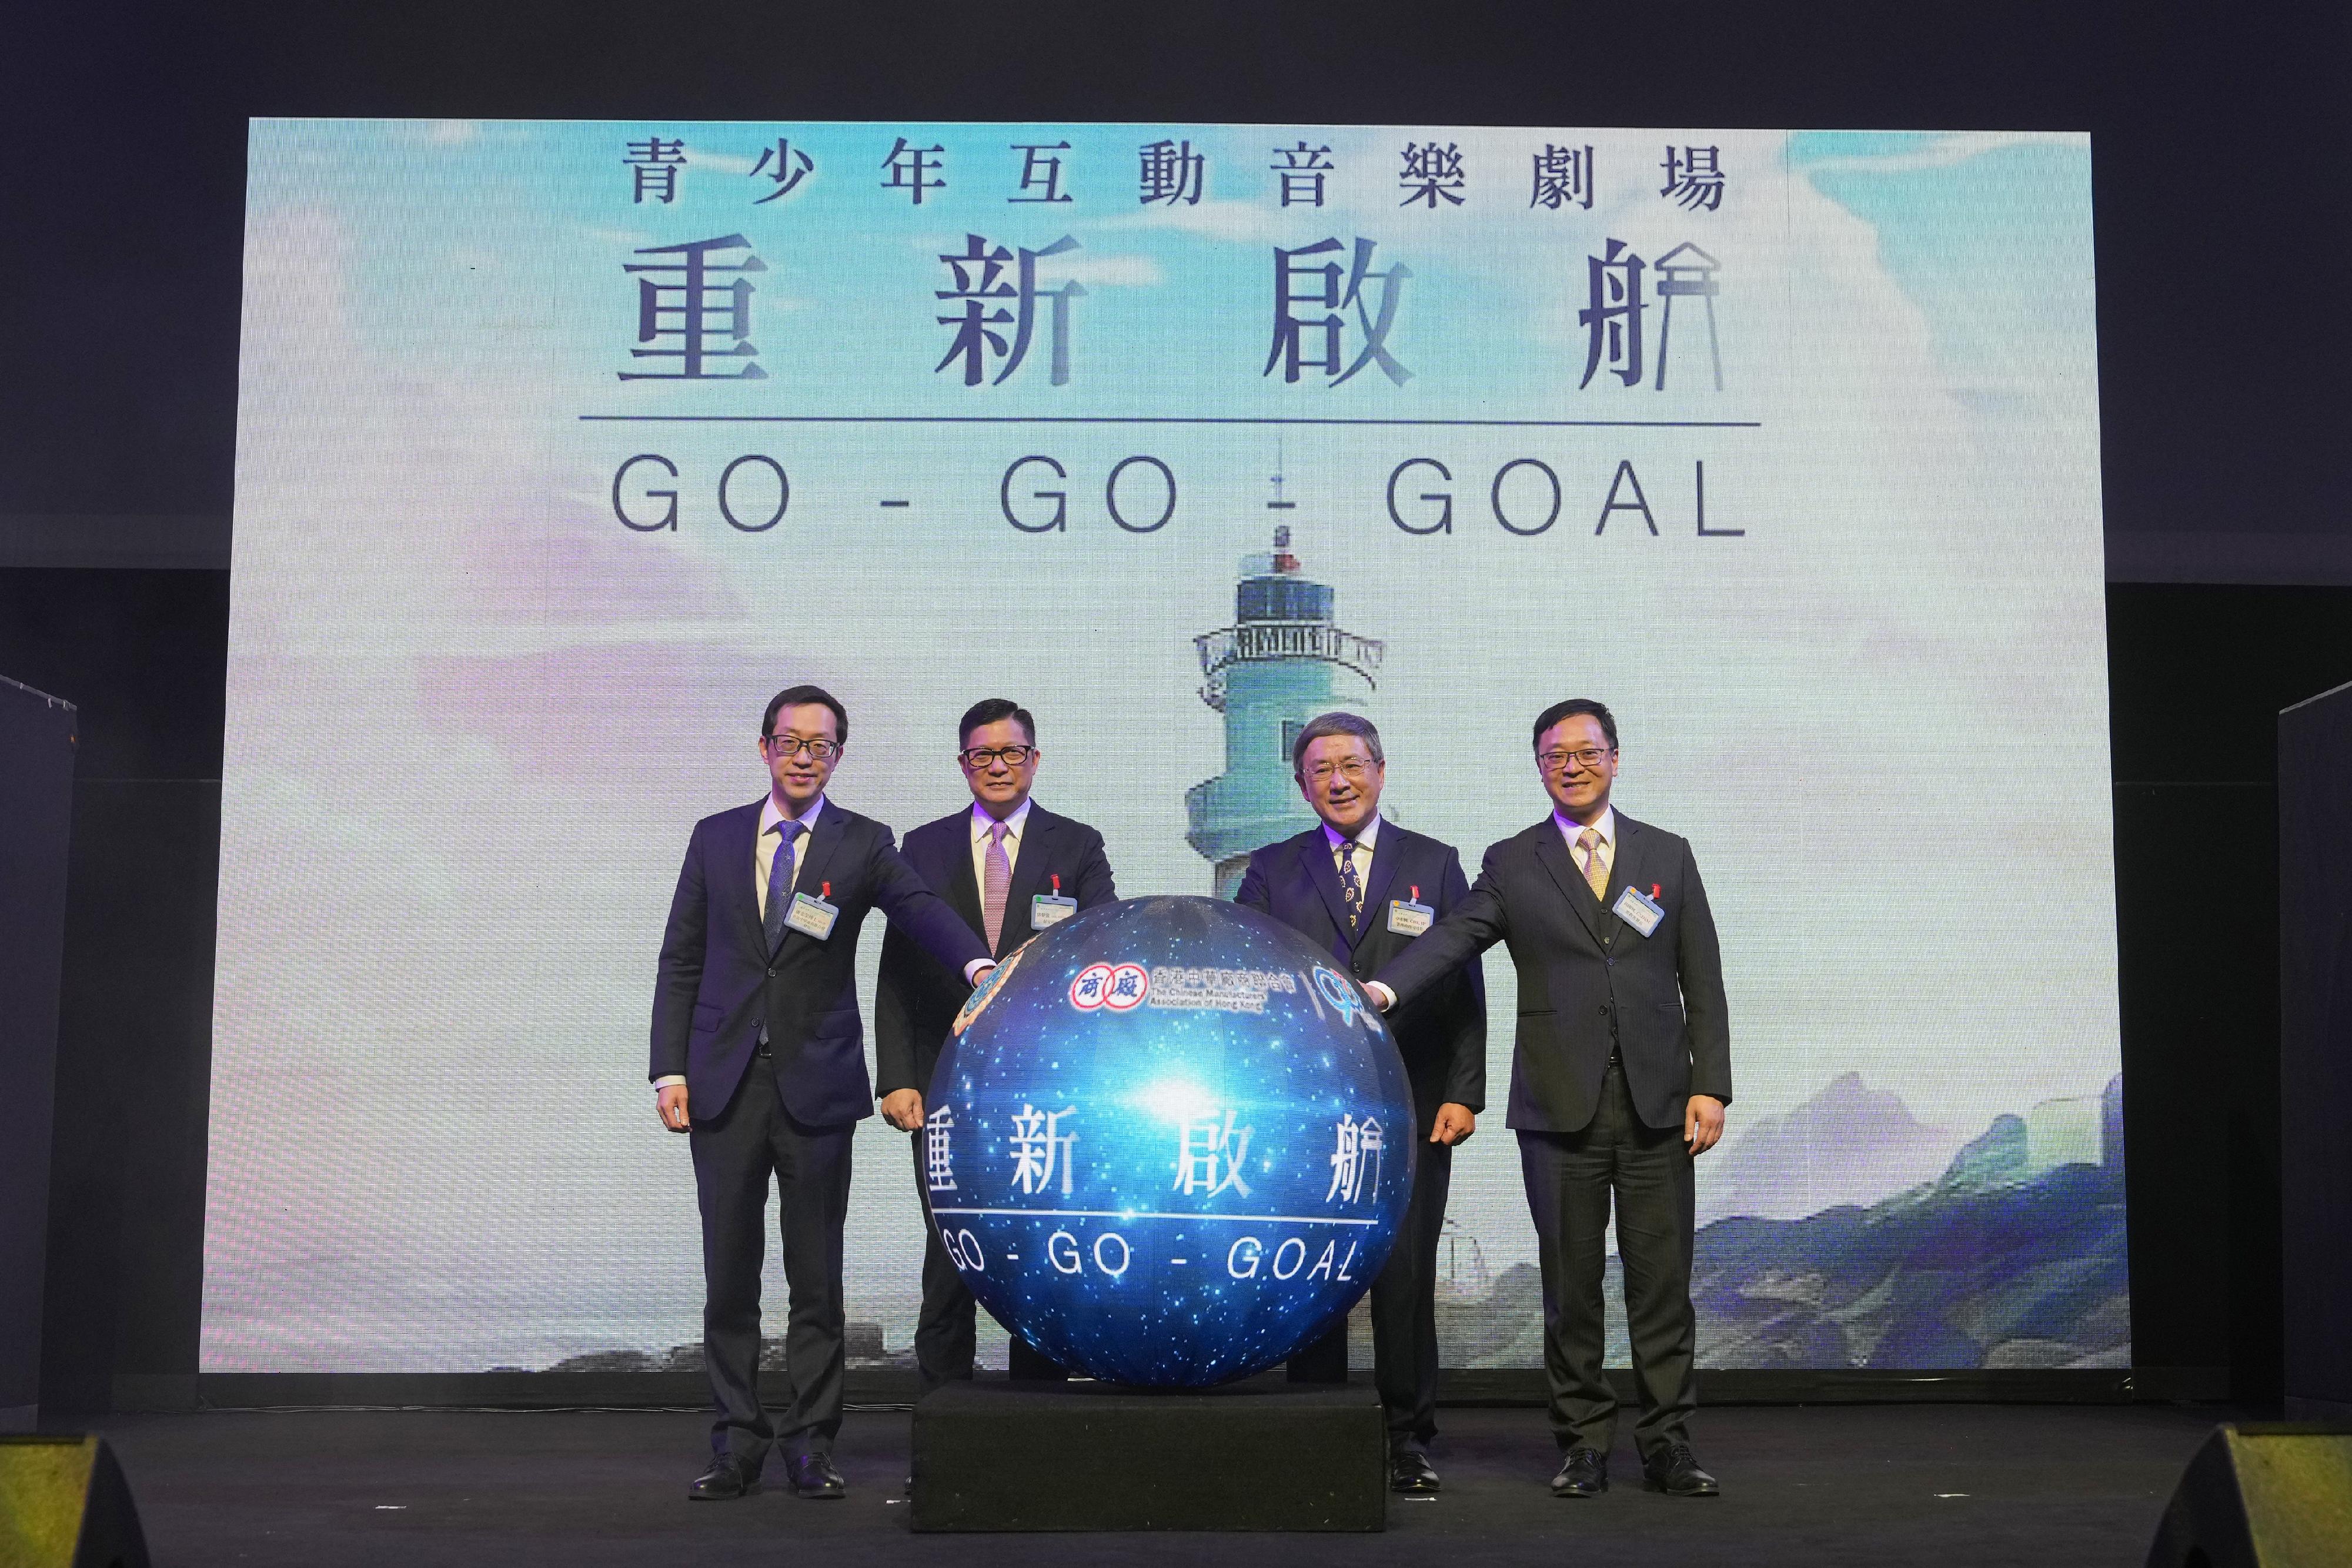 The Correctional Services Department and the Chinese Manufacturers' Association of Hong Kong jointly organised a youth musical drama, "Life Revitalisation Go Go Goal!", at Queen Elizabeth Stadium today (January 26) to promote law-abiding and rehabilitation messages. Photo shows the Acting Chief Secretary for Administration, Mr Cheuk Wing-hing (second right); the Secretary for Security, Mr Tang Ping-keung (second left); the Commissioner of Correctional Services, Mr Wong Kwok-hing (first right); and the President of the Chinese Manufacturers' Association of Hong Kong, Dr Wingco Lo (first left), officiating at the opening ceremony.